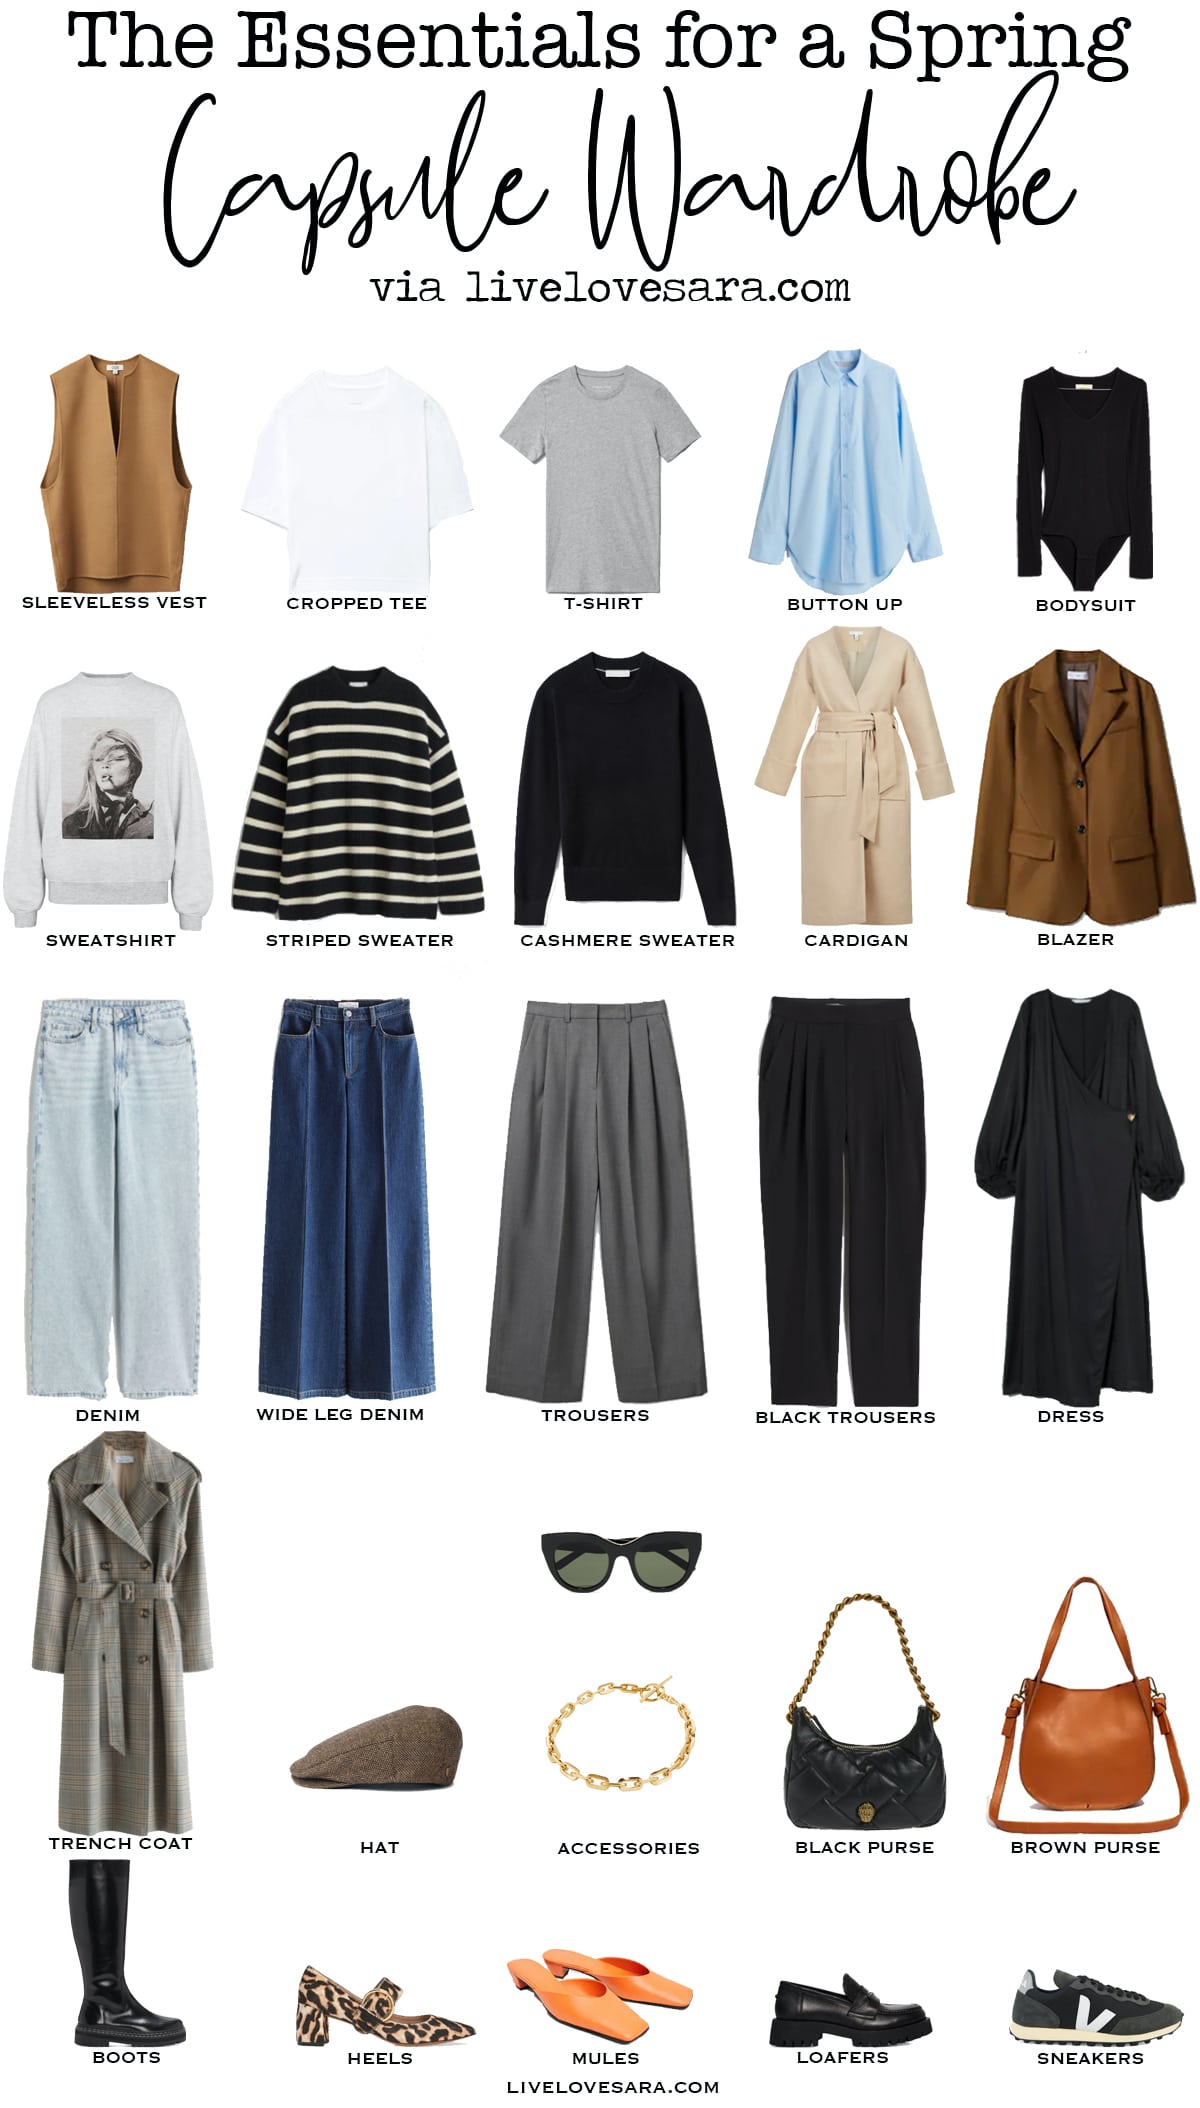 Creating the Perfect Spring Capsule Wardrobe